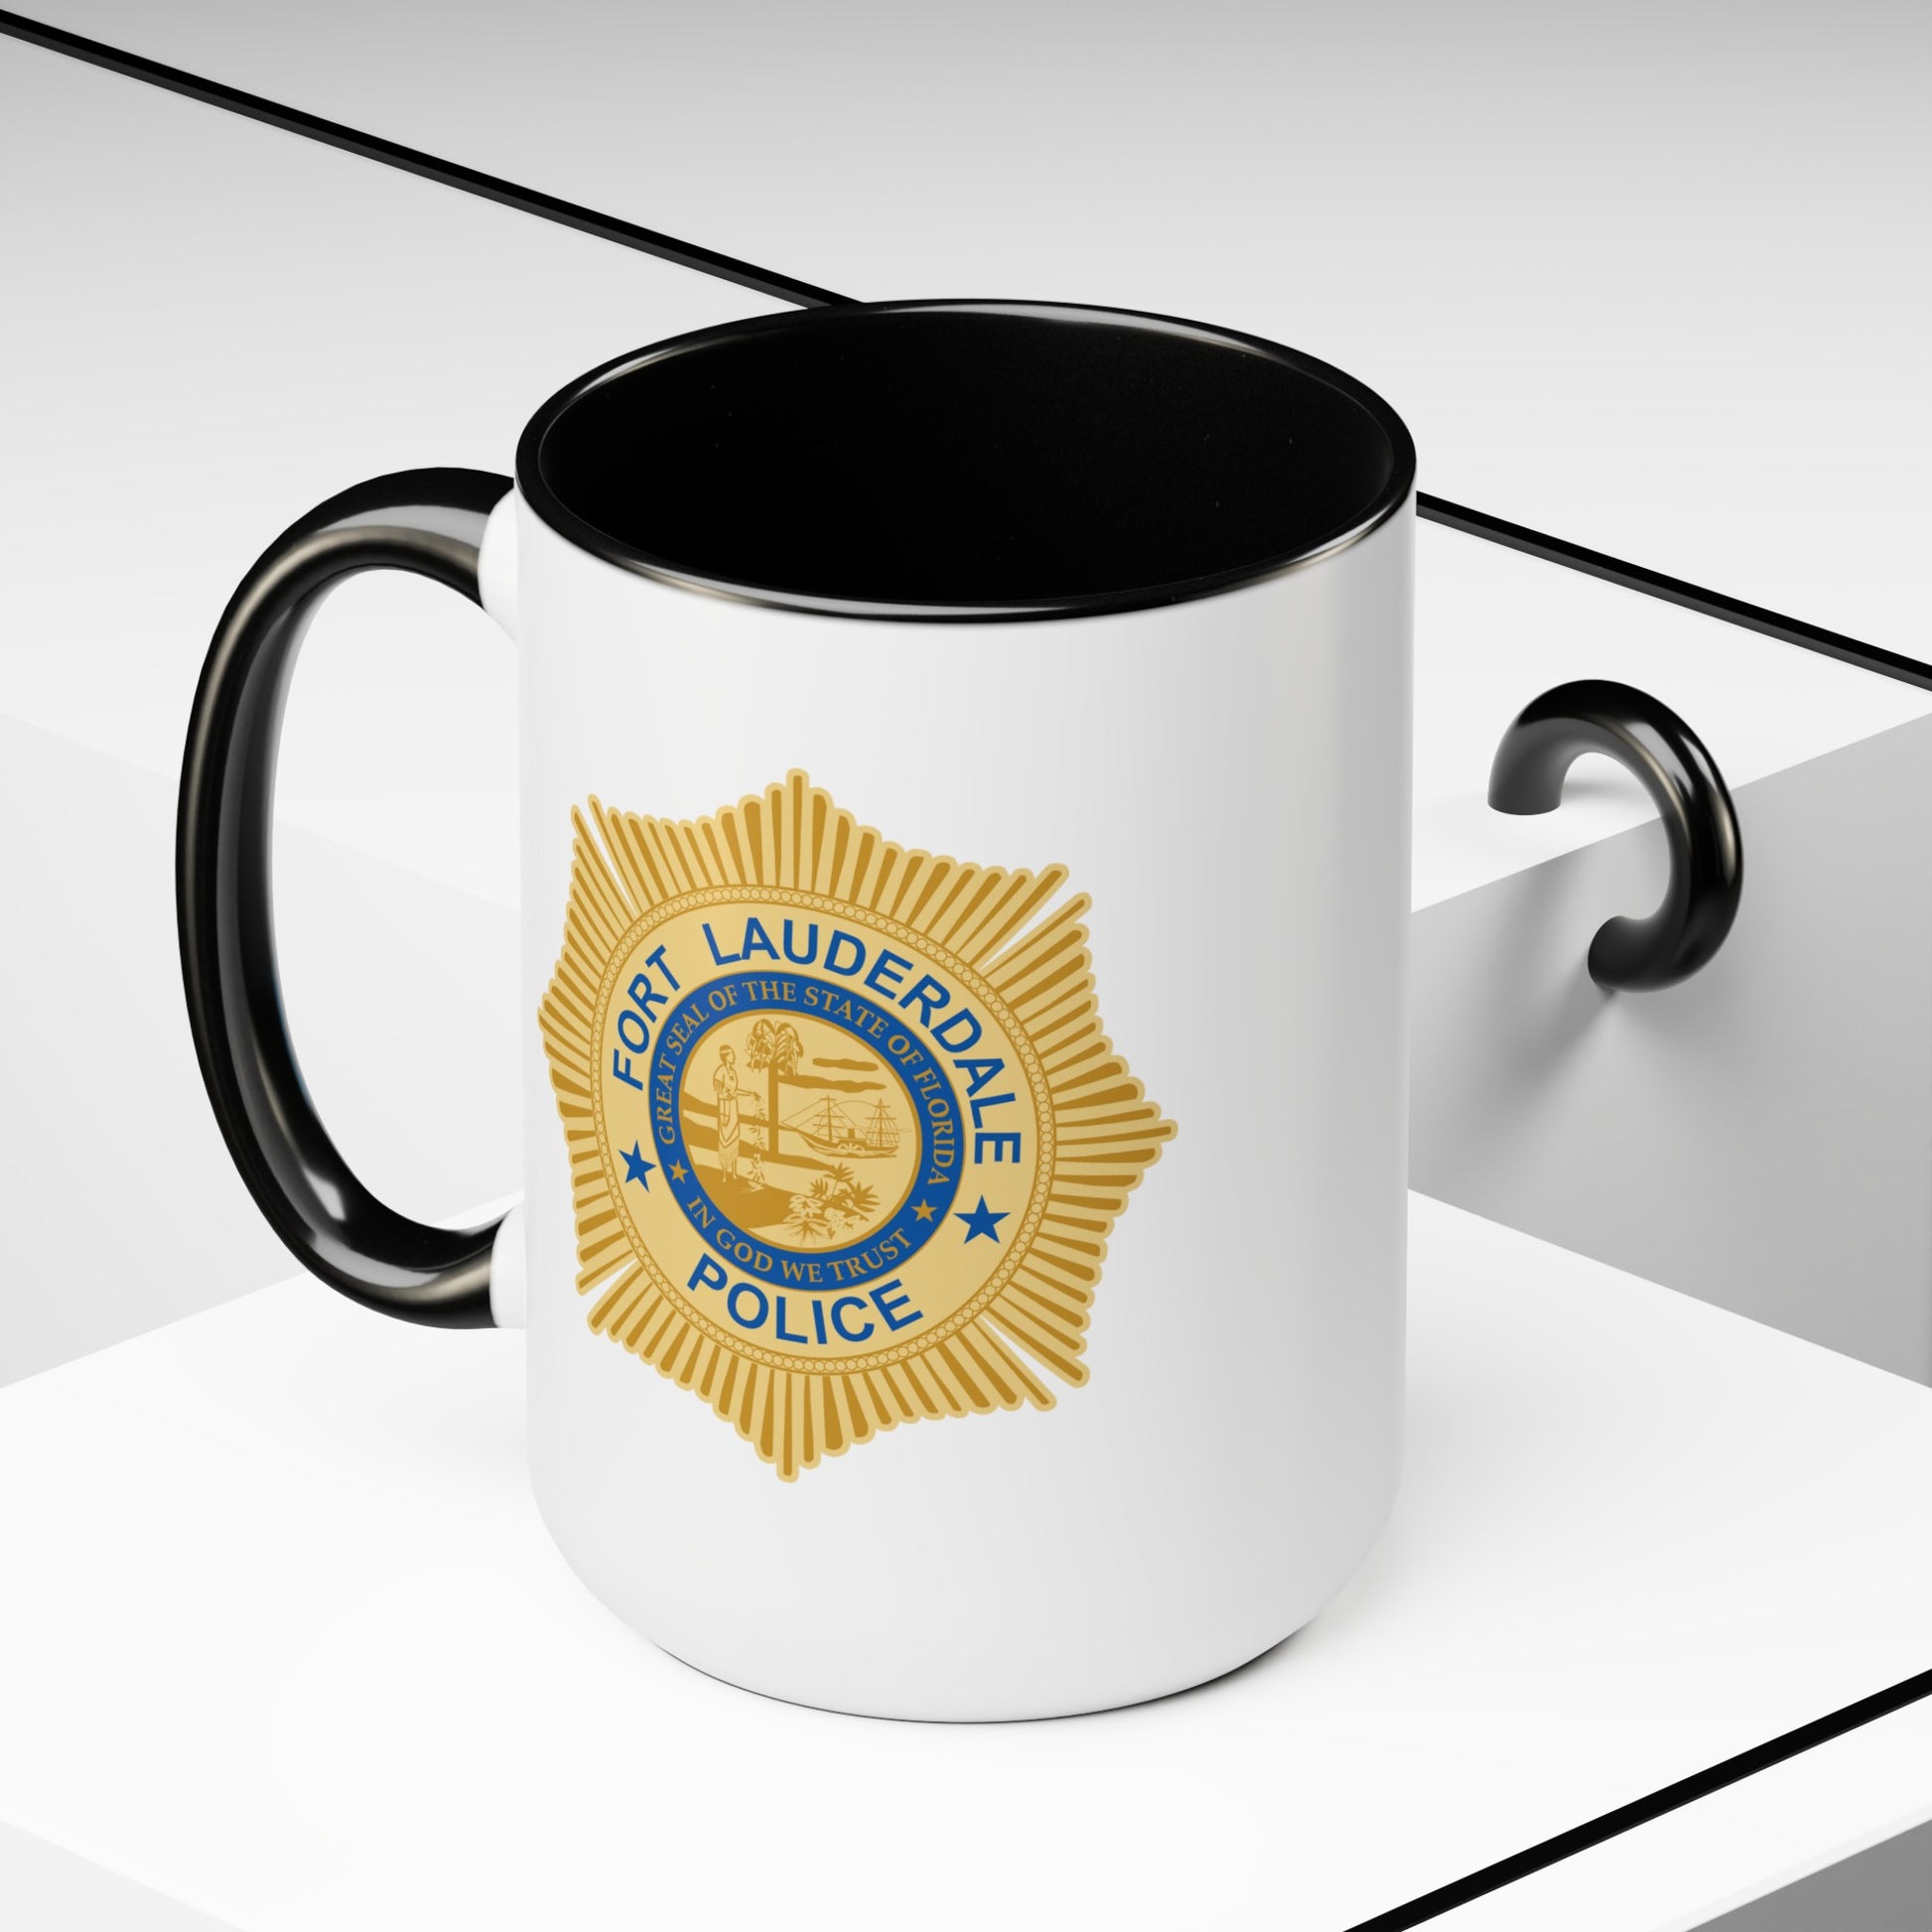 Fort Lauderdale Police Coffee Mug - Double Sided Black Accent White Ceramic 15oz by TheGlassyLass.com